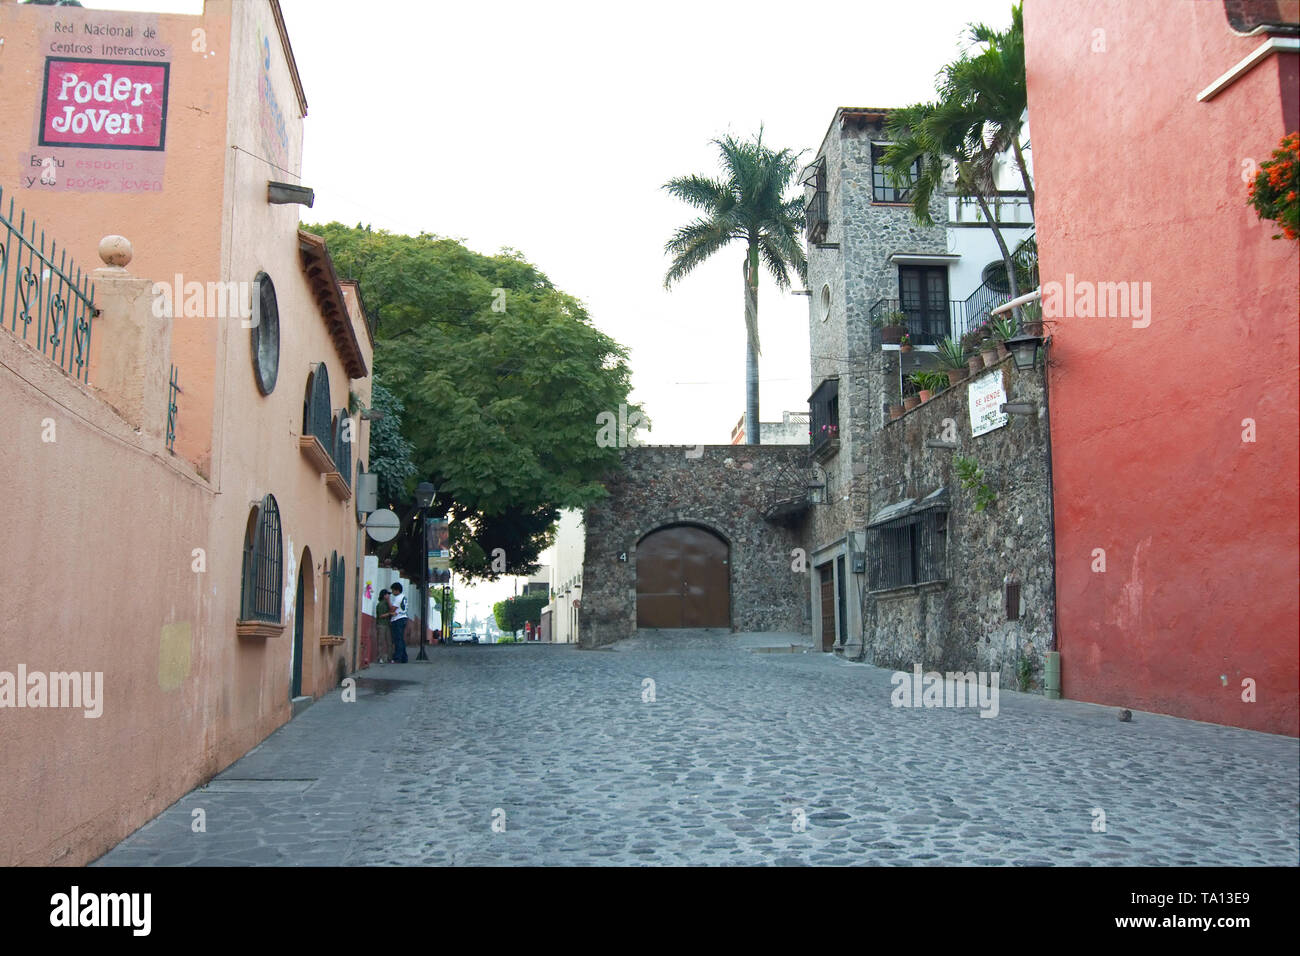 Cuernavaca, Morelos, Mexico - 2019: View of a traditional alley at the city historic center. Stock Photo